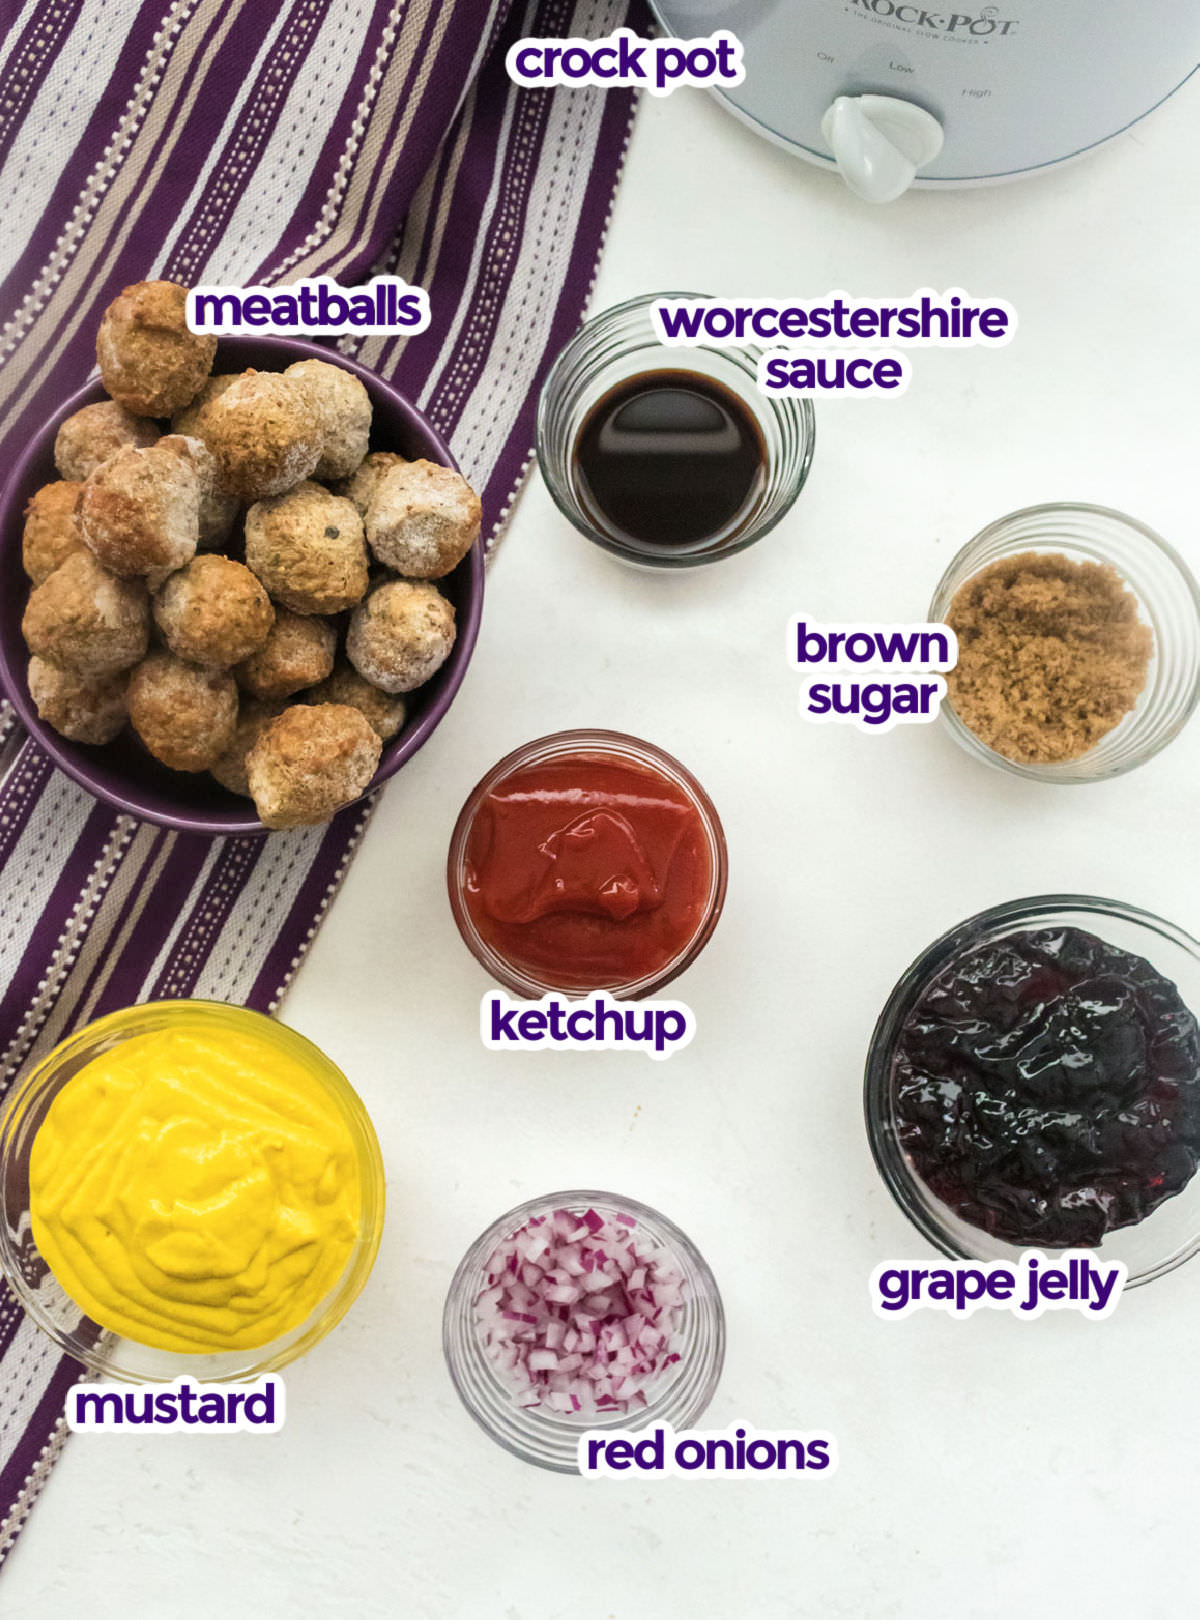 All the ingredients you will need to make Grape Jelly Meatballs including frozen meatballs, Worcestershire Sauce, Brown Sugar, Ketchup, Mustard, Red Onion and Grape Jelly.